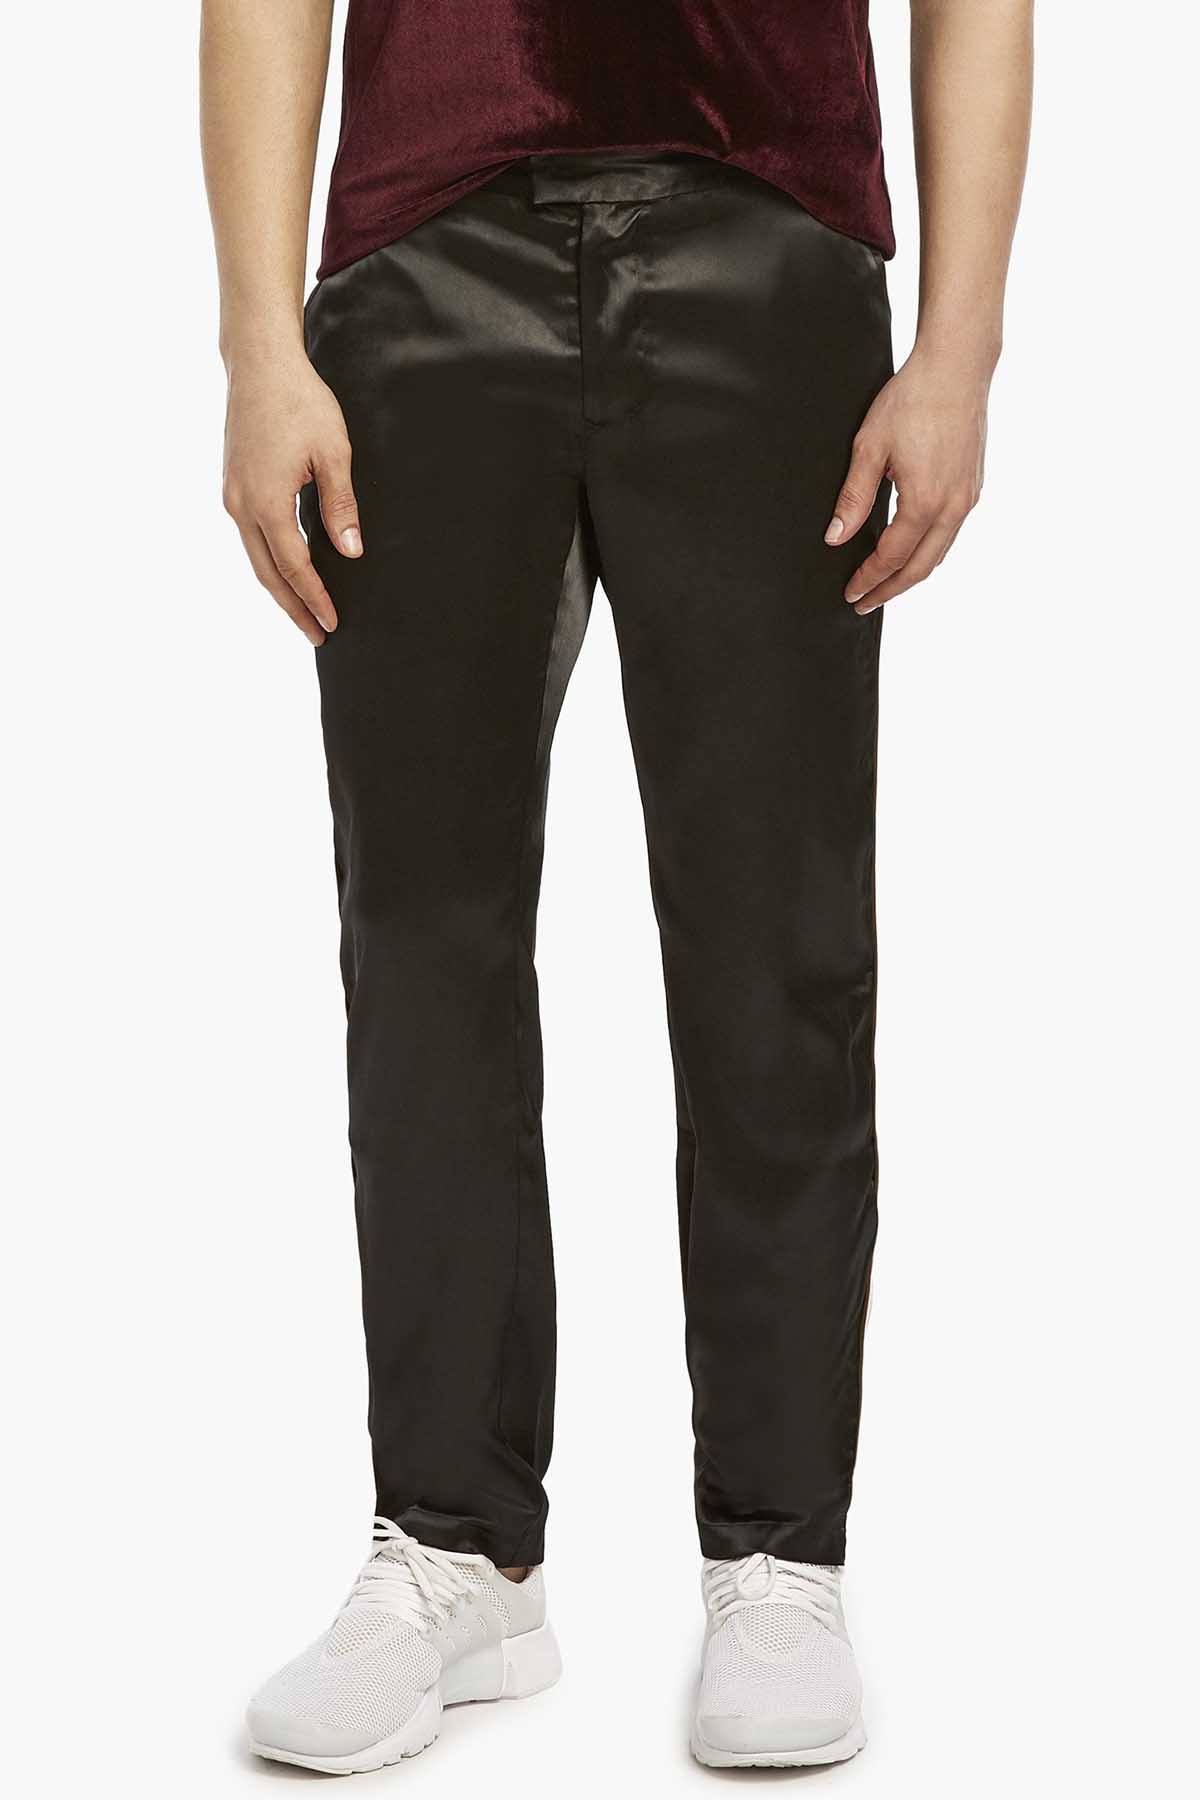 2(X)IST Black/White After-Hours Tab-Front Pant